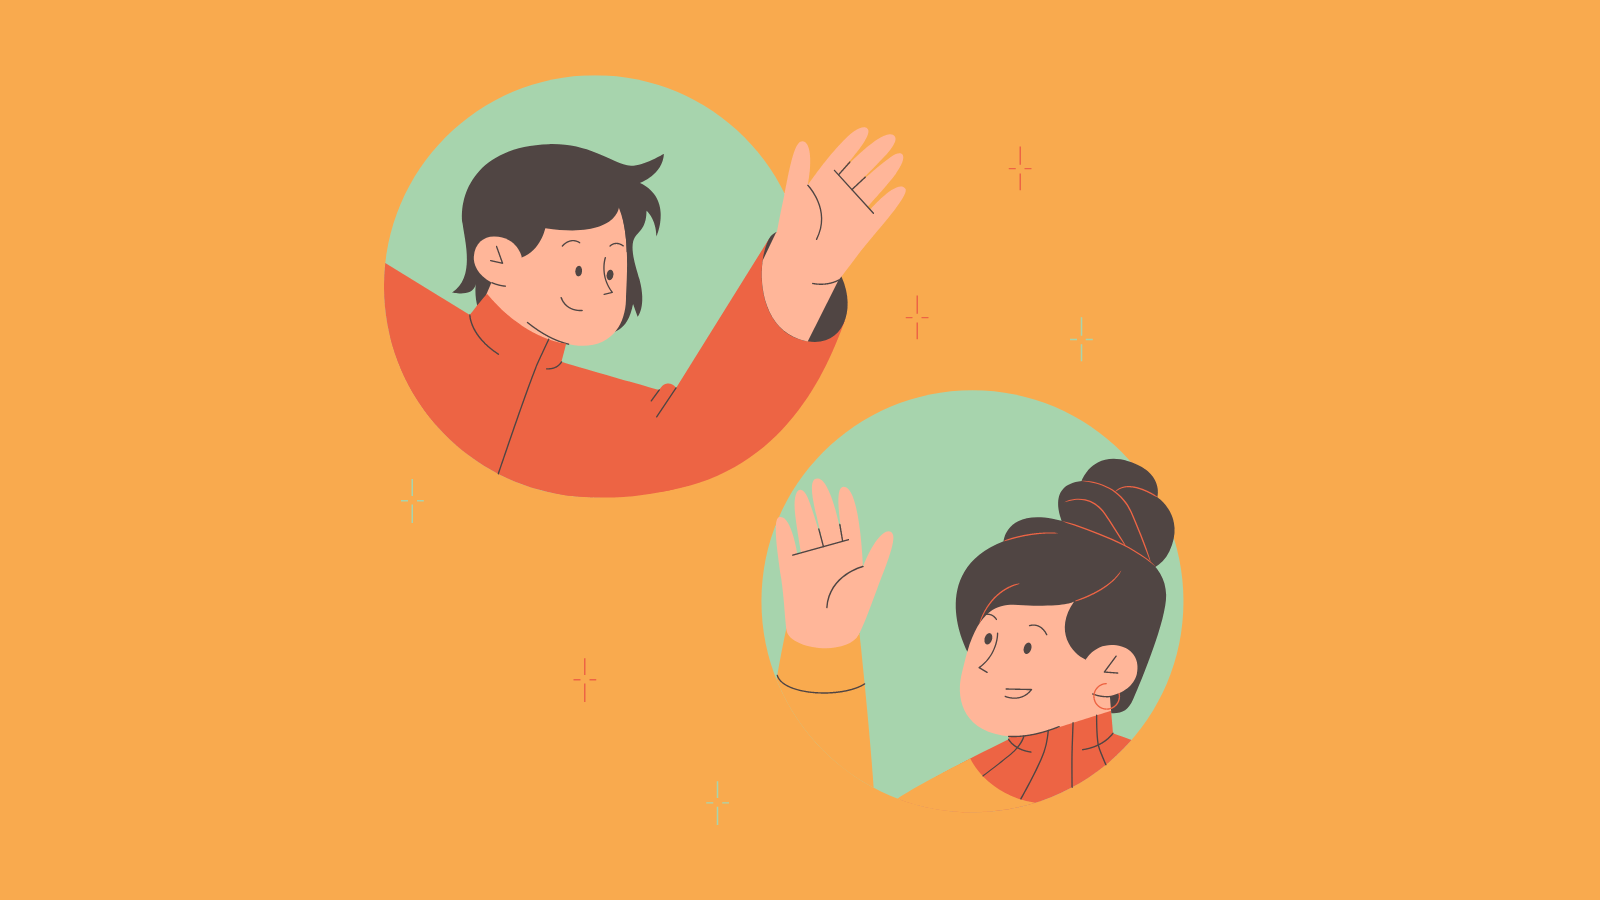 Two people in separate circles waving at each other